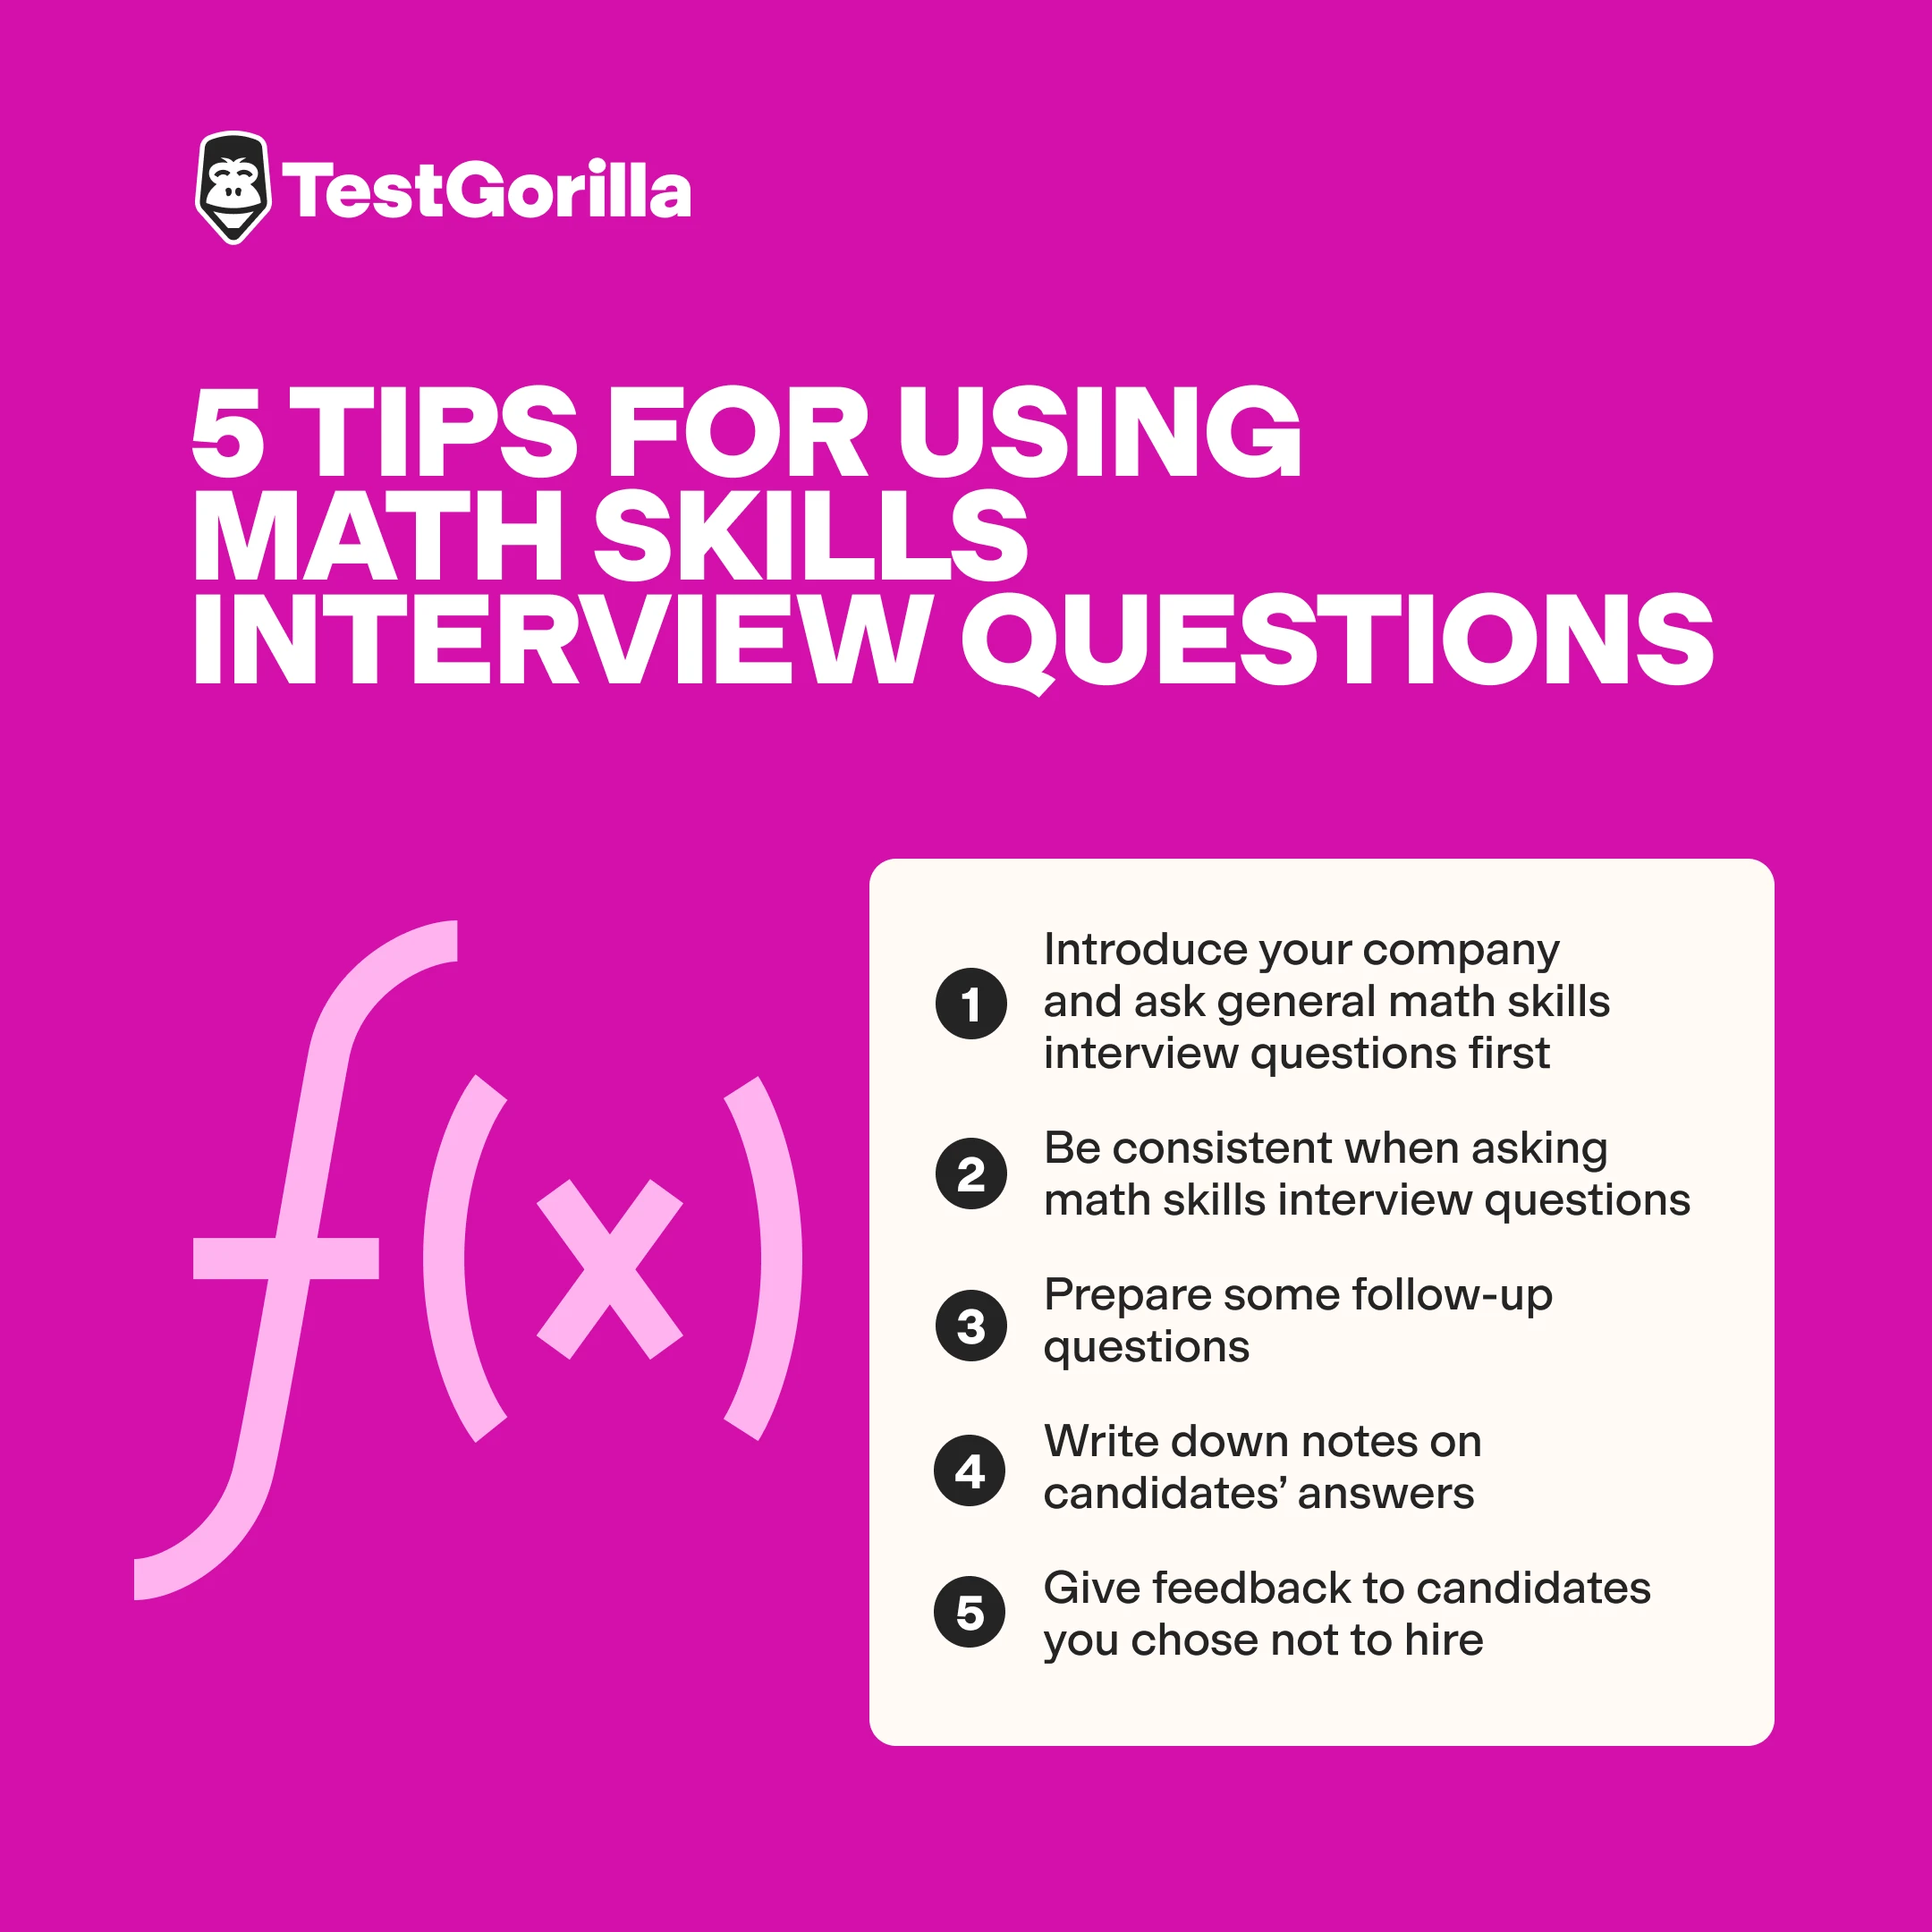 image showing 5 tips for using math skills interview questions